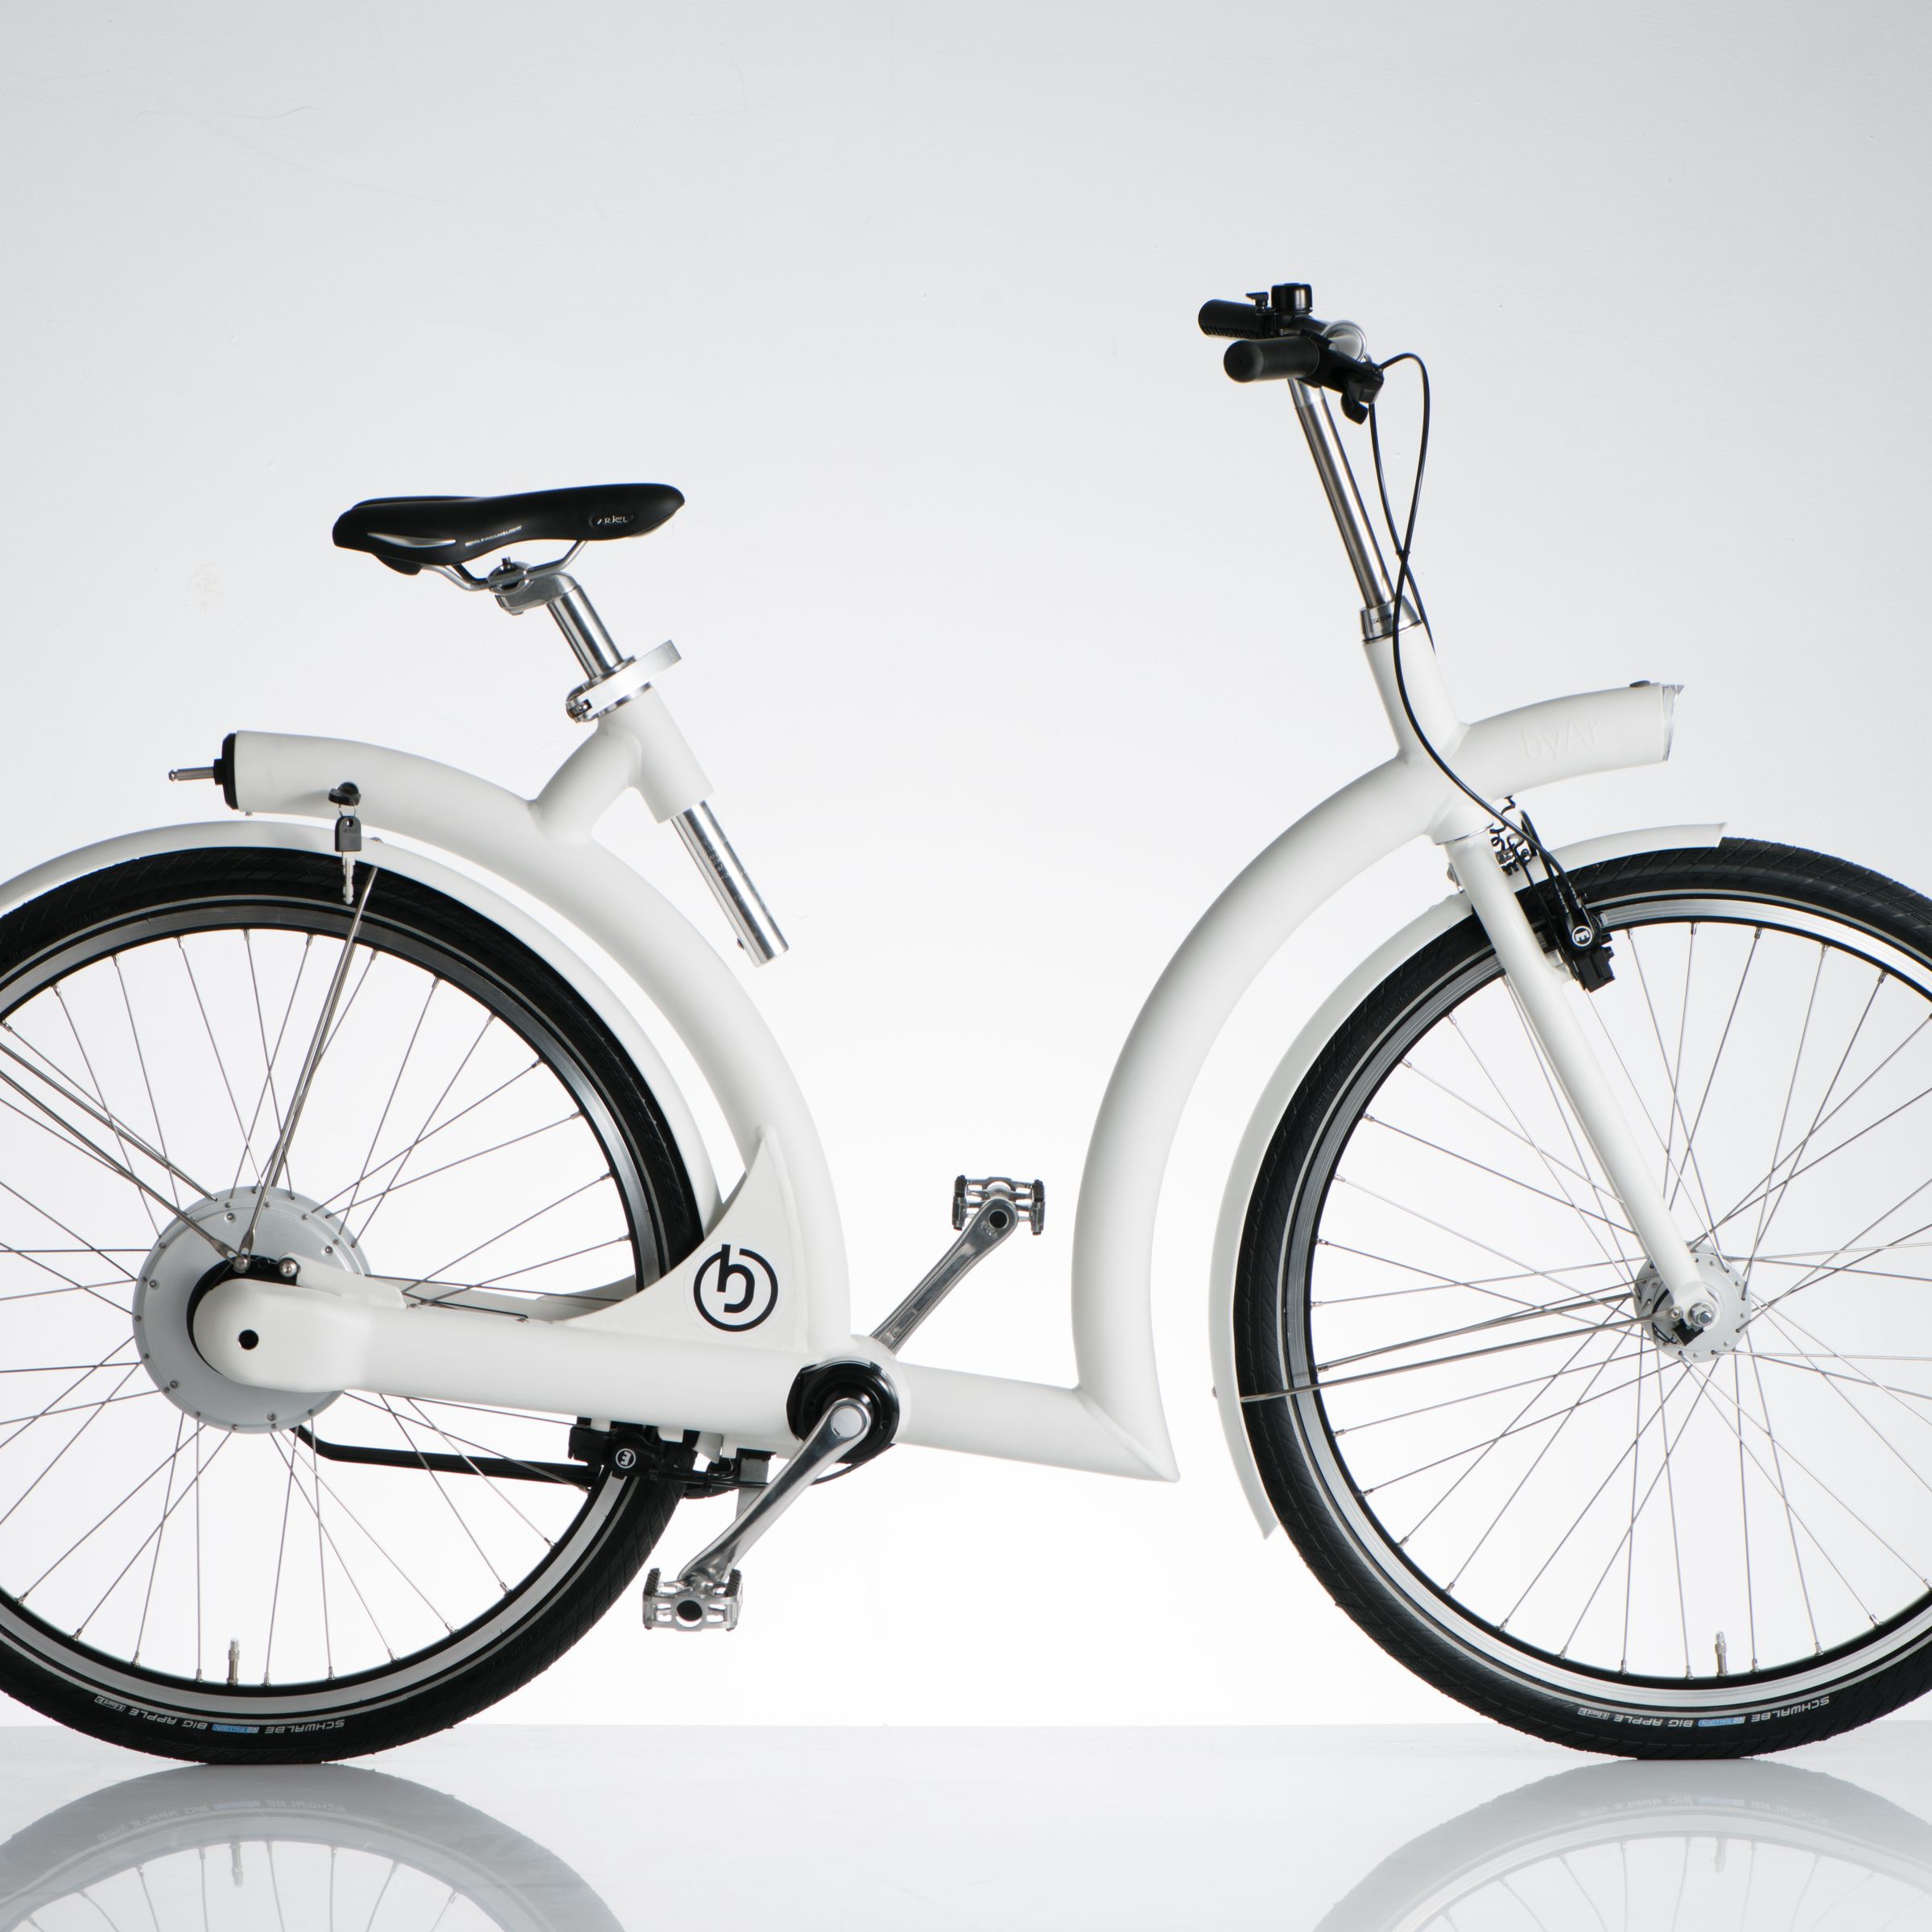 The 2019 production model of the Byar Volta electric bike.